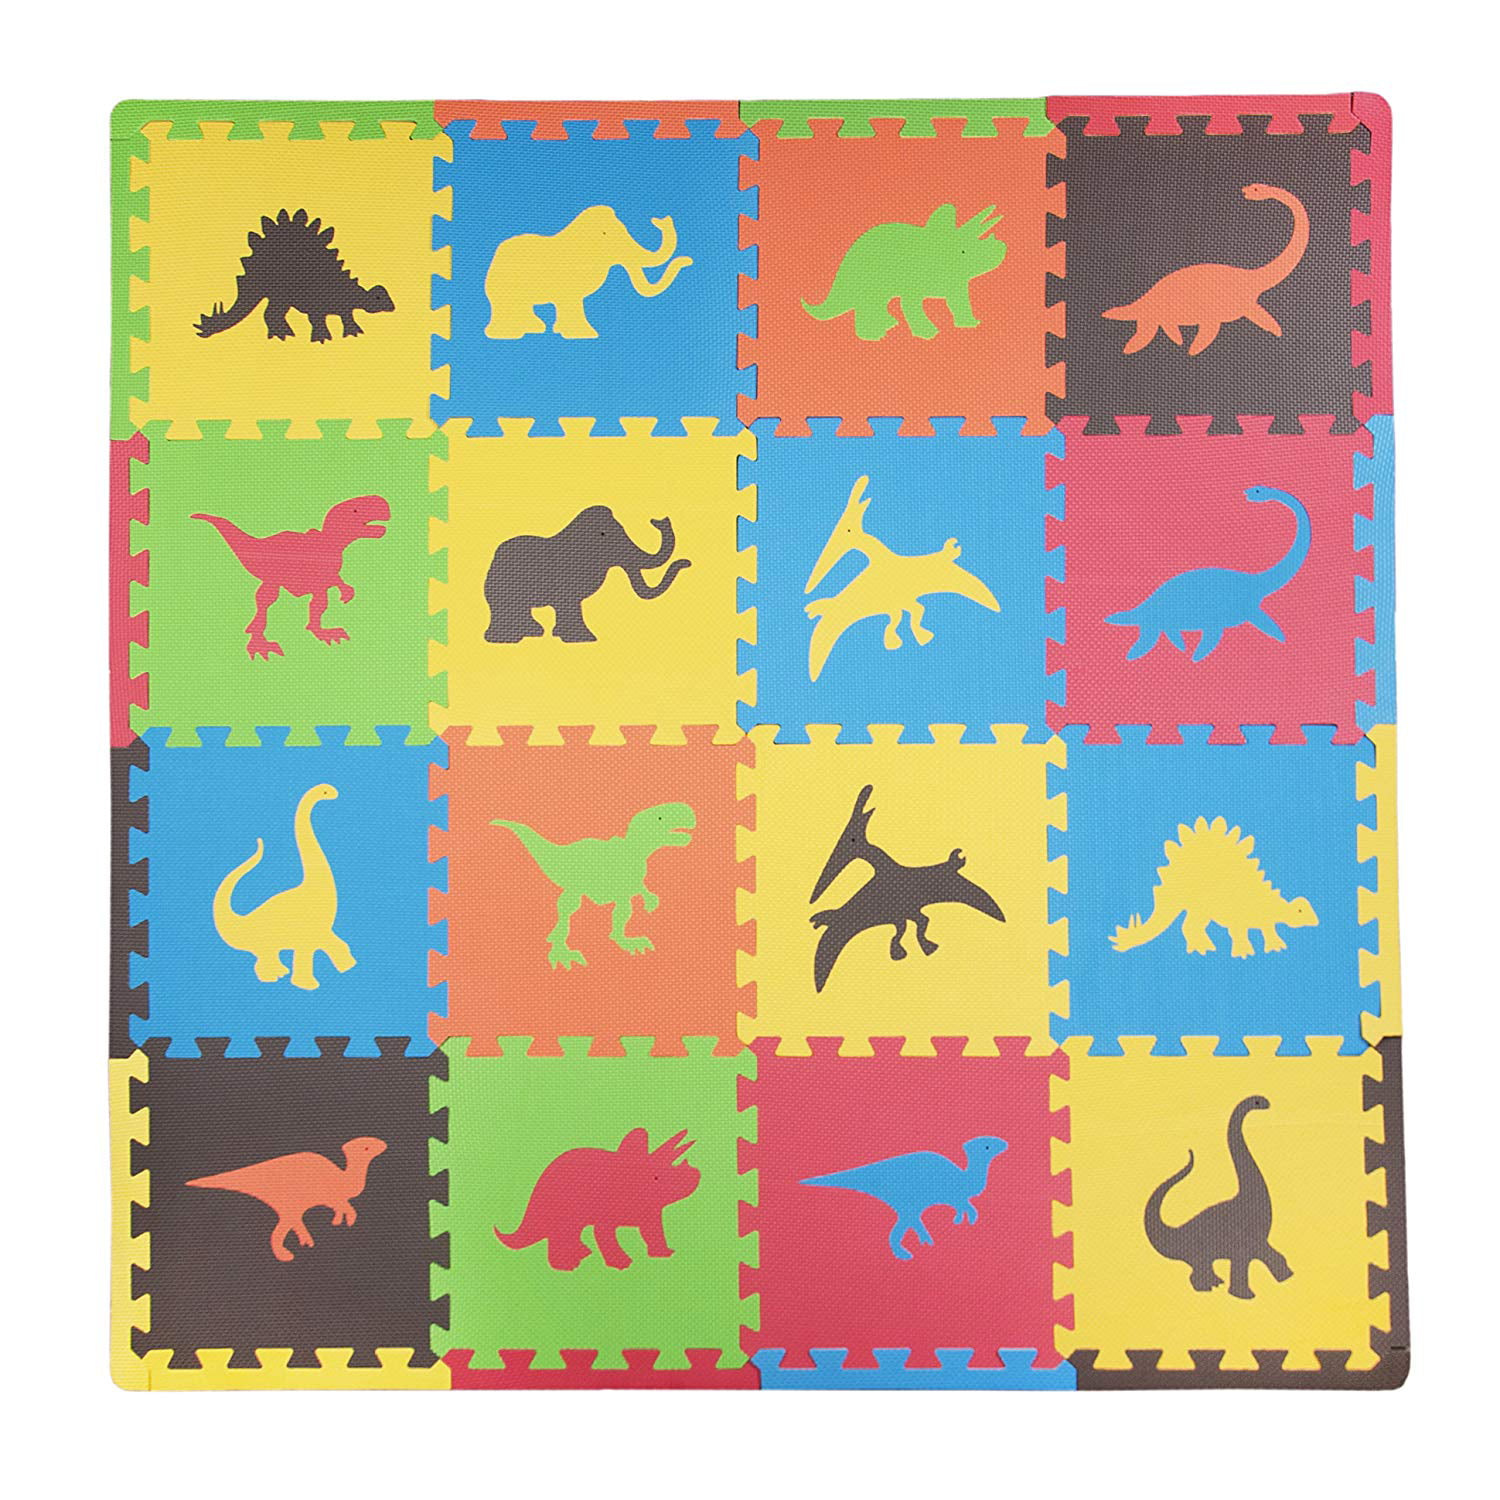 Pop-Out P024B3010 Air, Land MQIAOHAM 9 Pieces with Fence Baby Kid Toddler Play Crawl Mat Carpet Playmat Foam Blanket Rug for Children Soft Foam Play Mat Puzzle Jigsaw with Transportation 